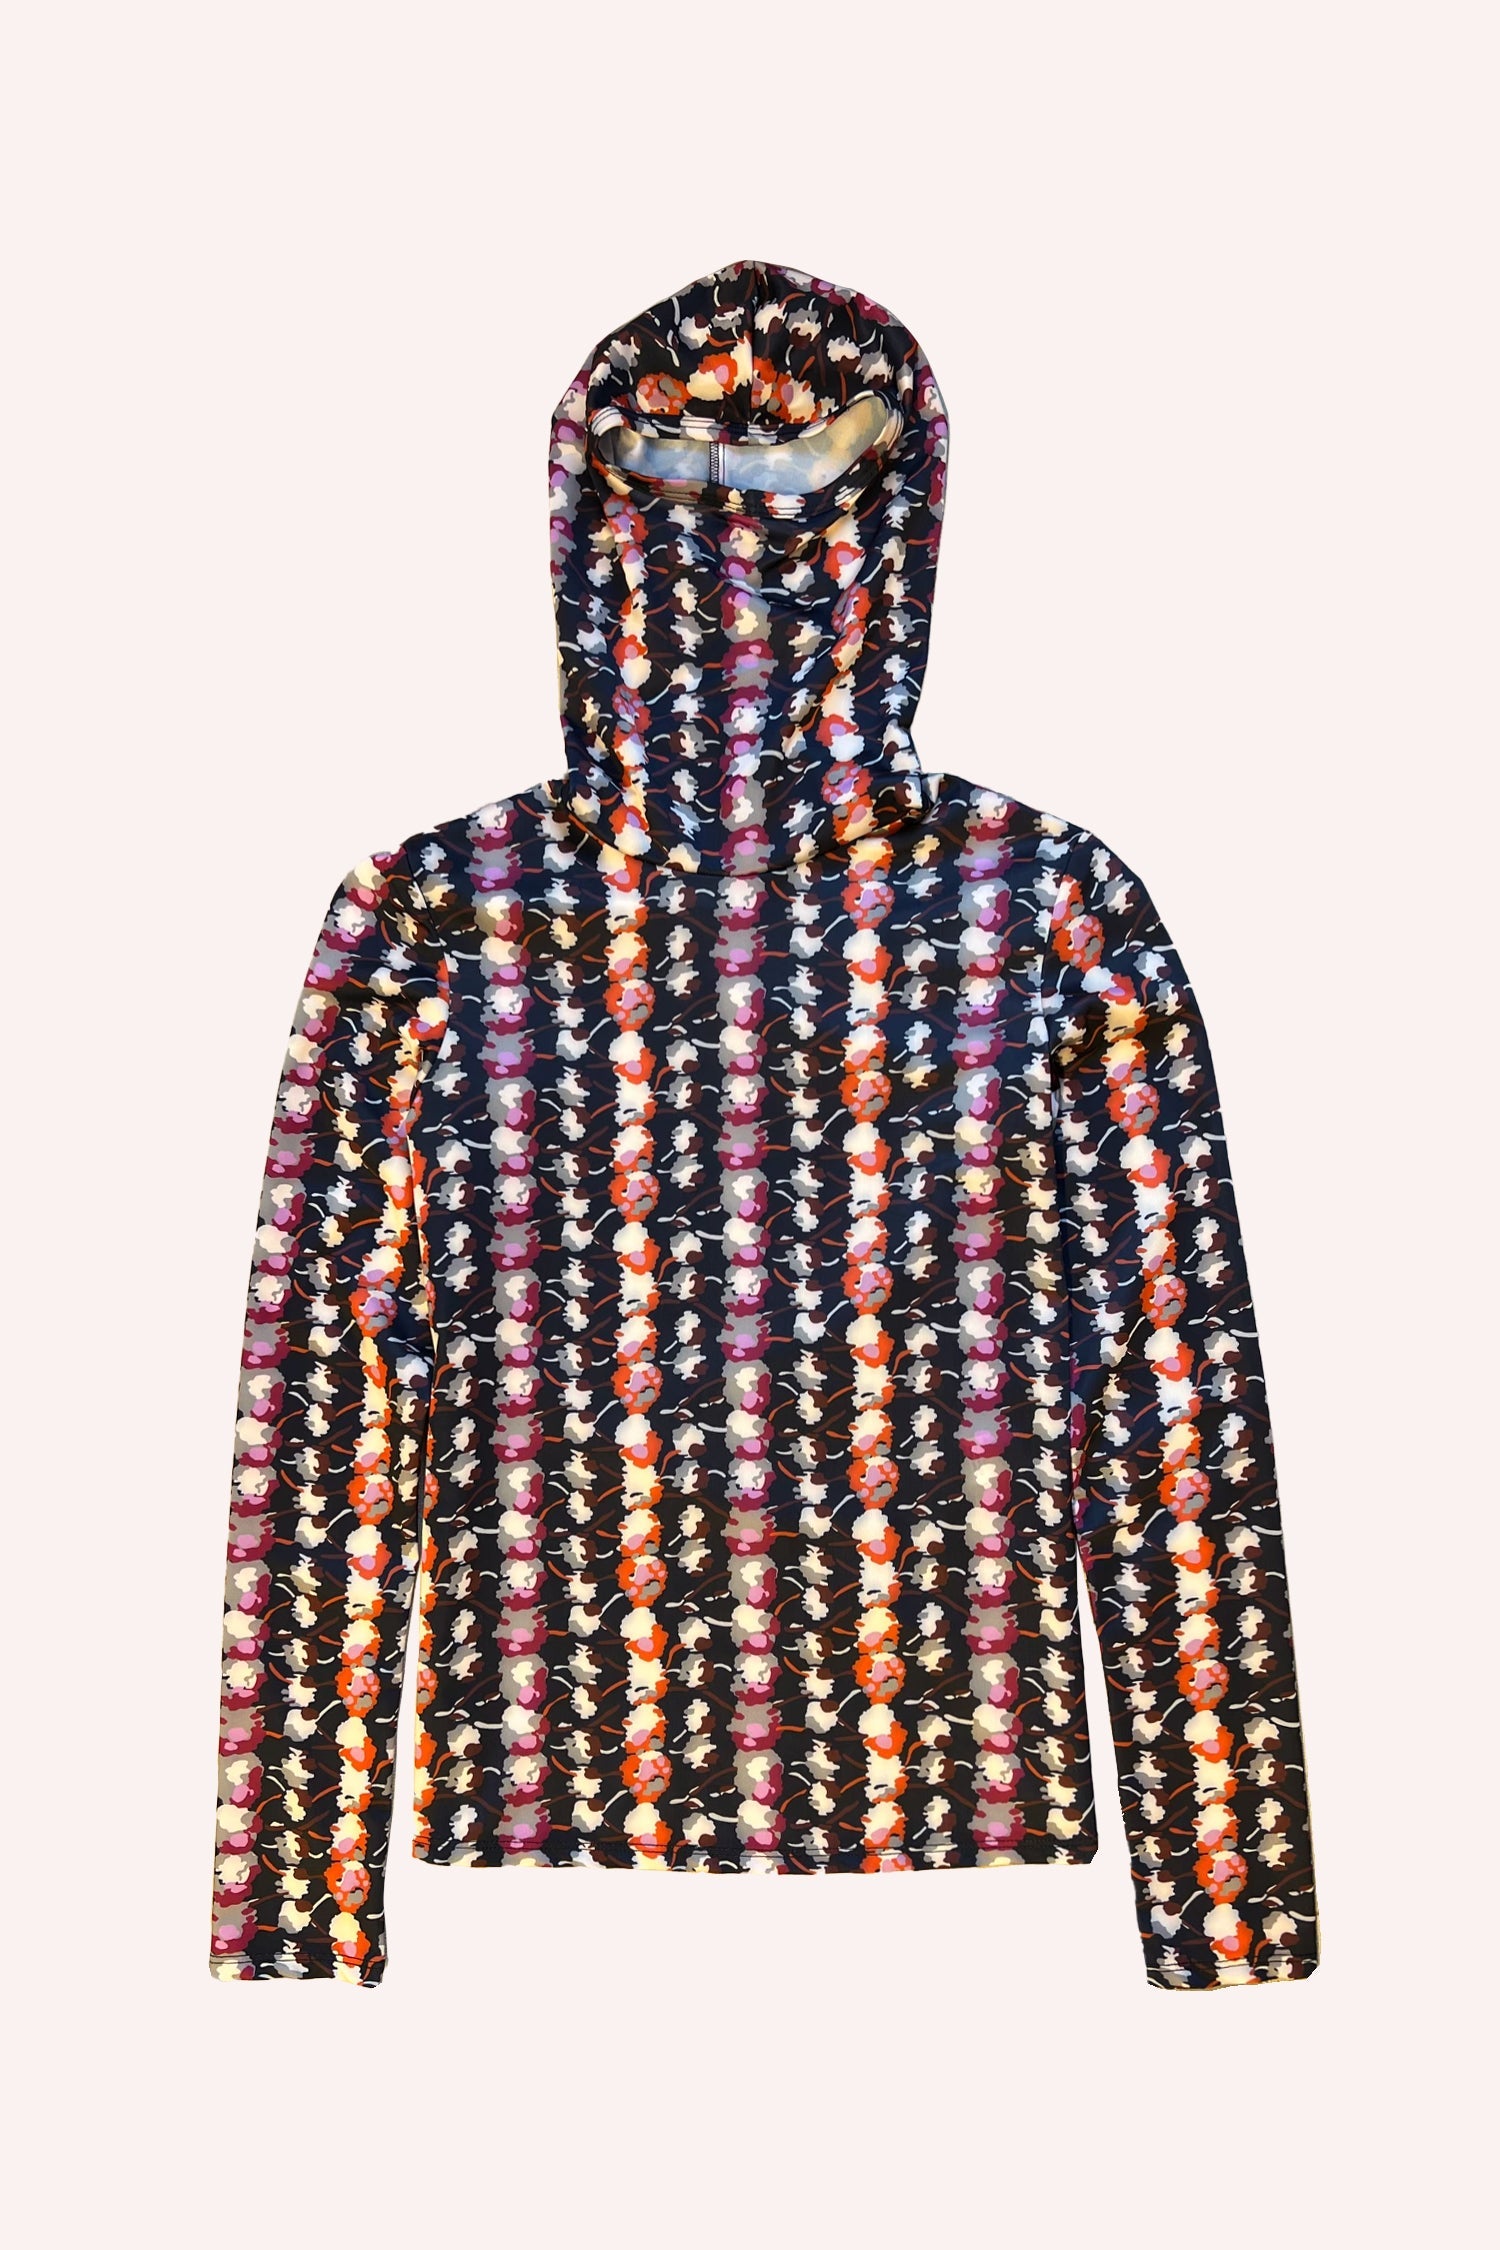 Floral Stripe Balaclava, top with a hoody, long sleeves, hips long, floral strips down in orange, lavender, yellow